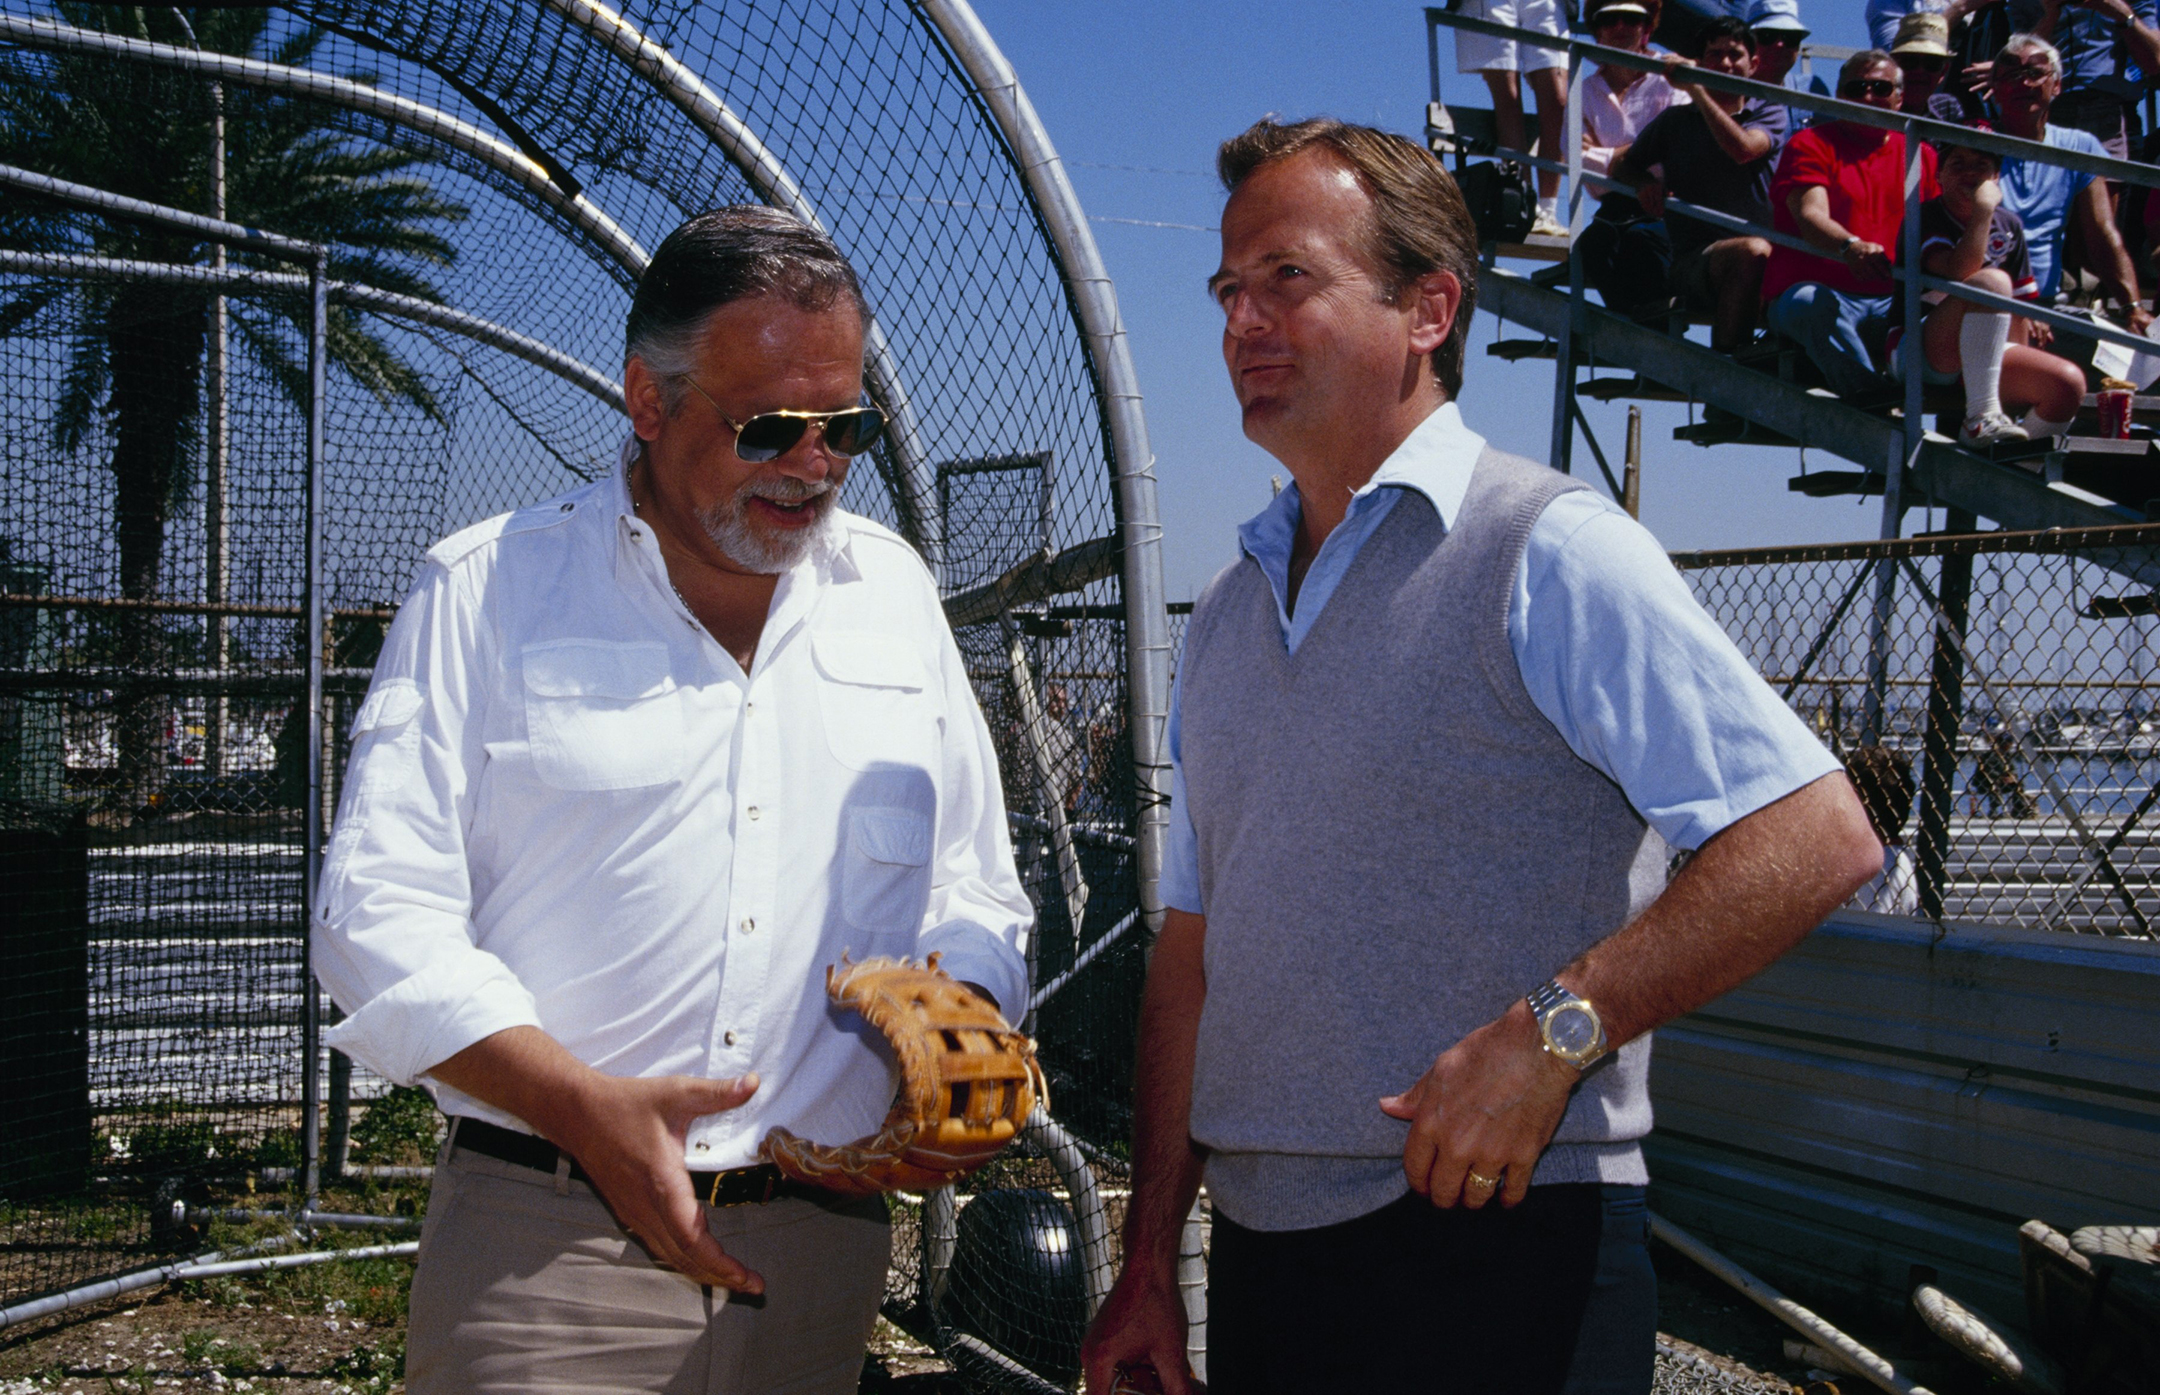  A. Bartlett Giamatti wearing a white shirt and aviator sunglasses stands next to then-MLB Commissioner Peter Ueberroth